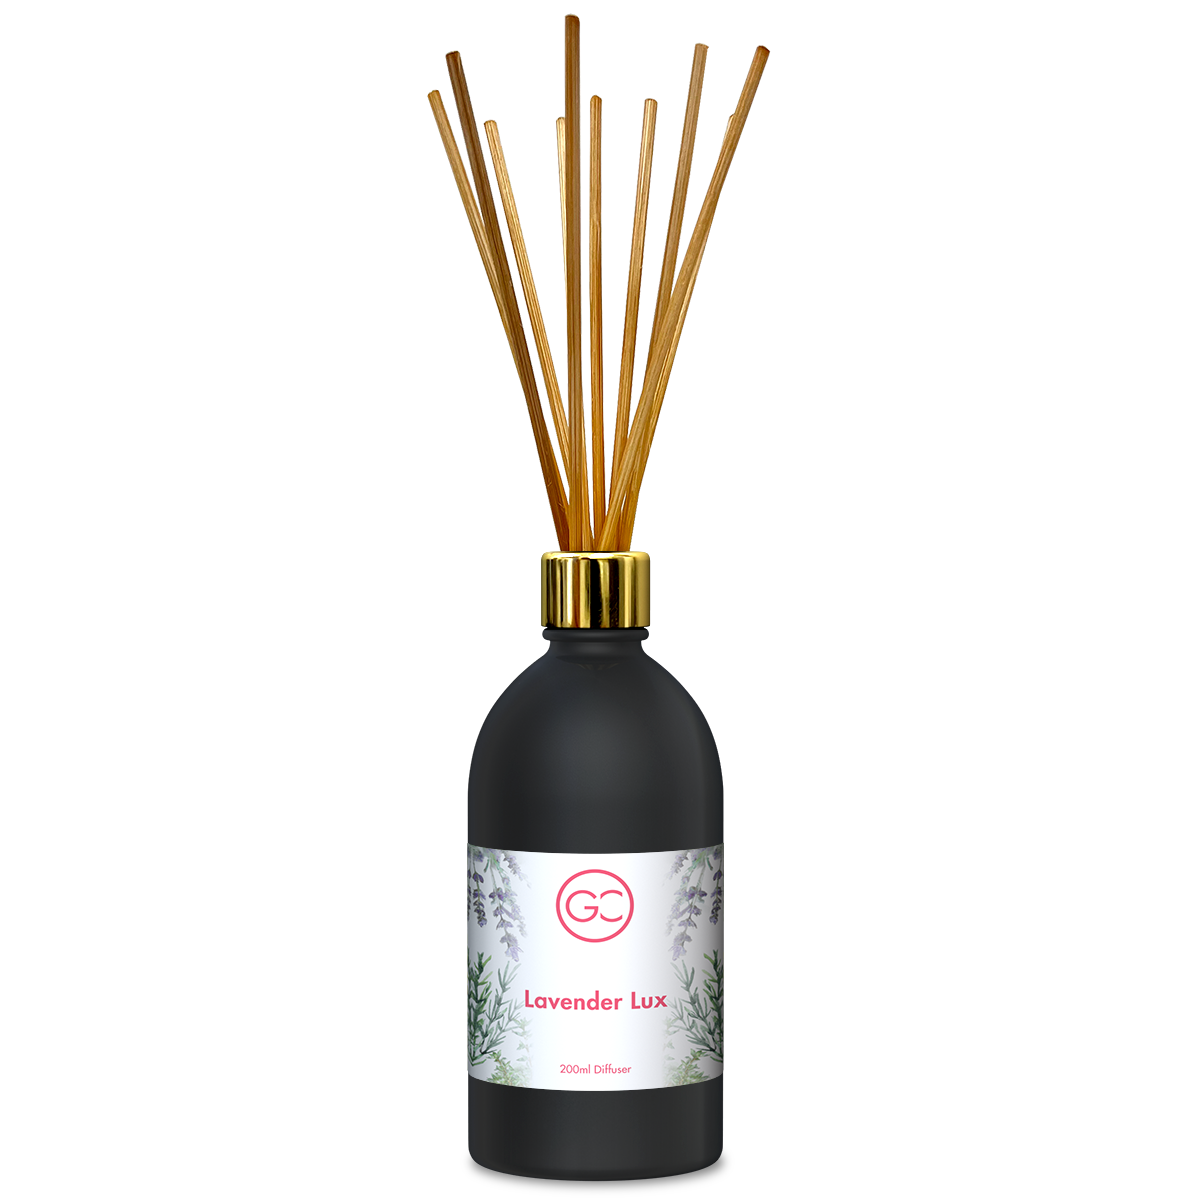 Lavender Lux Reed Diffuser 200ml